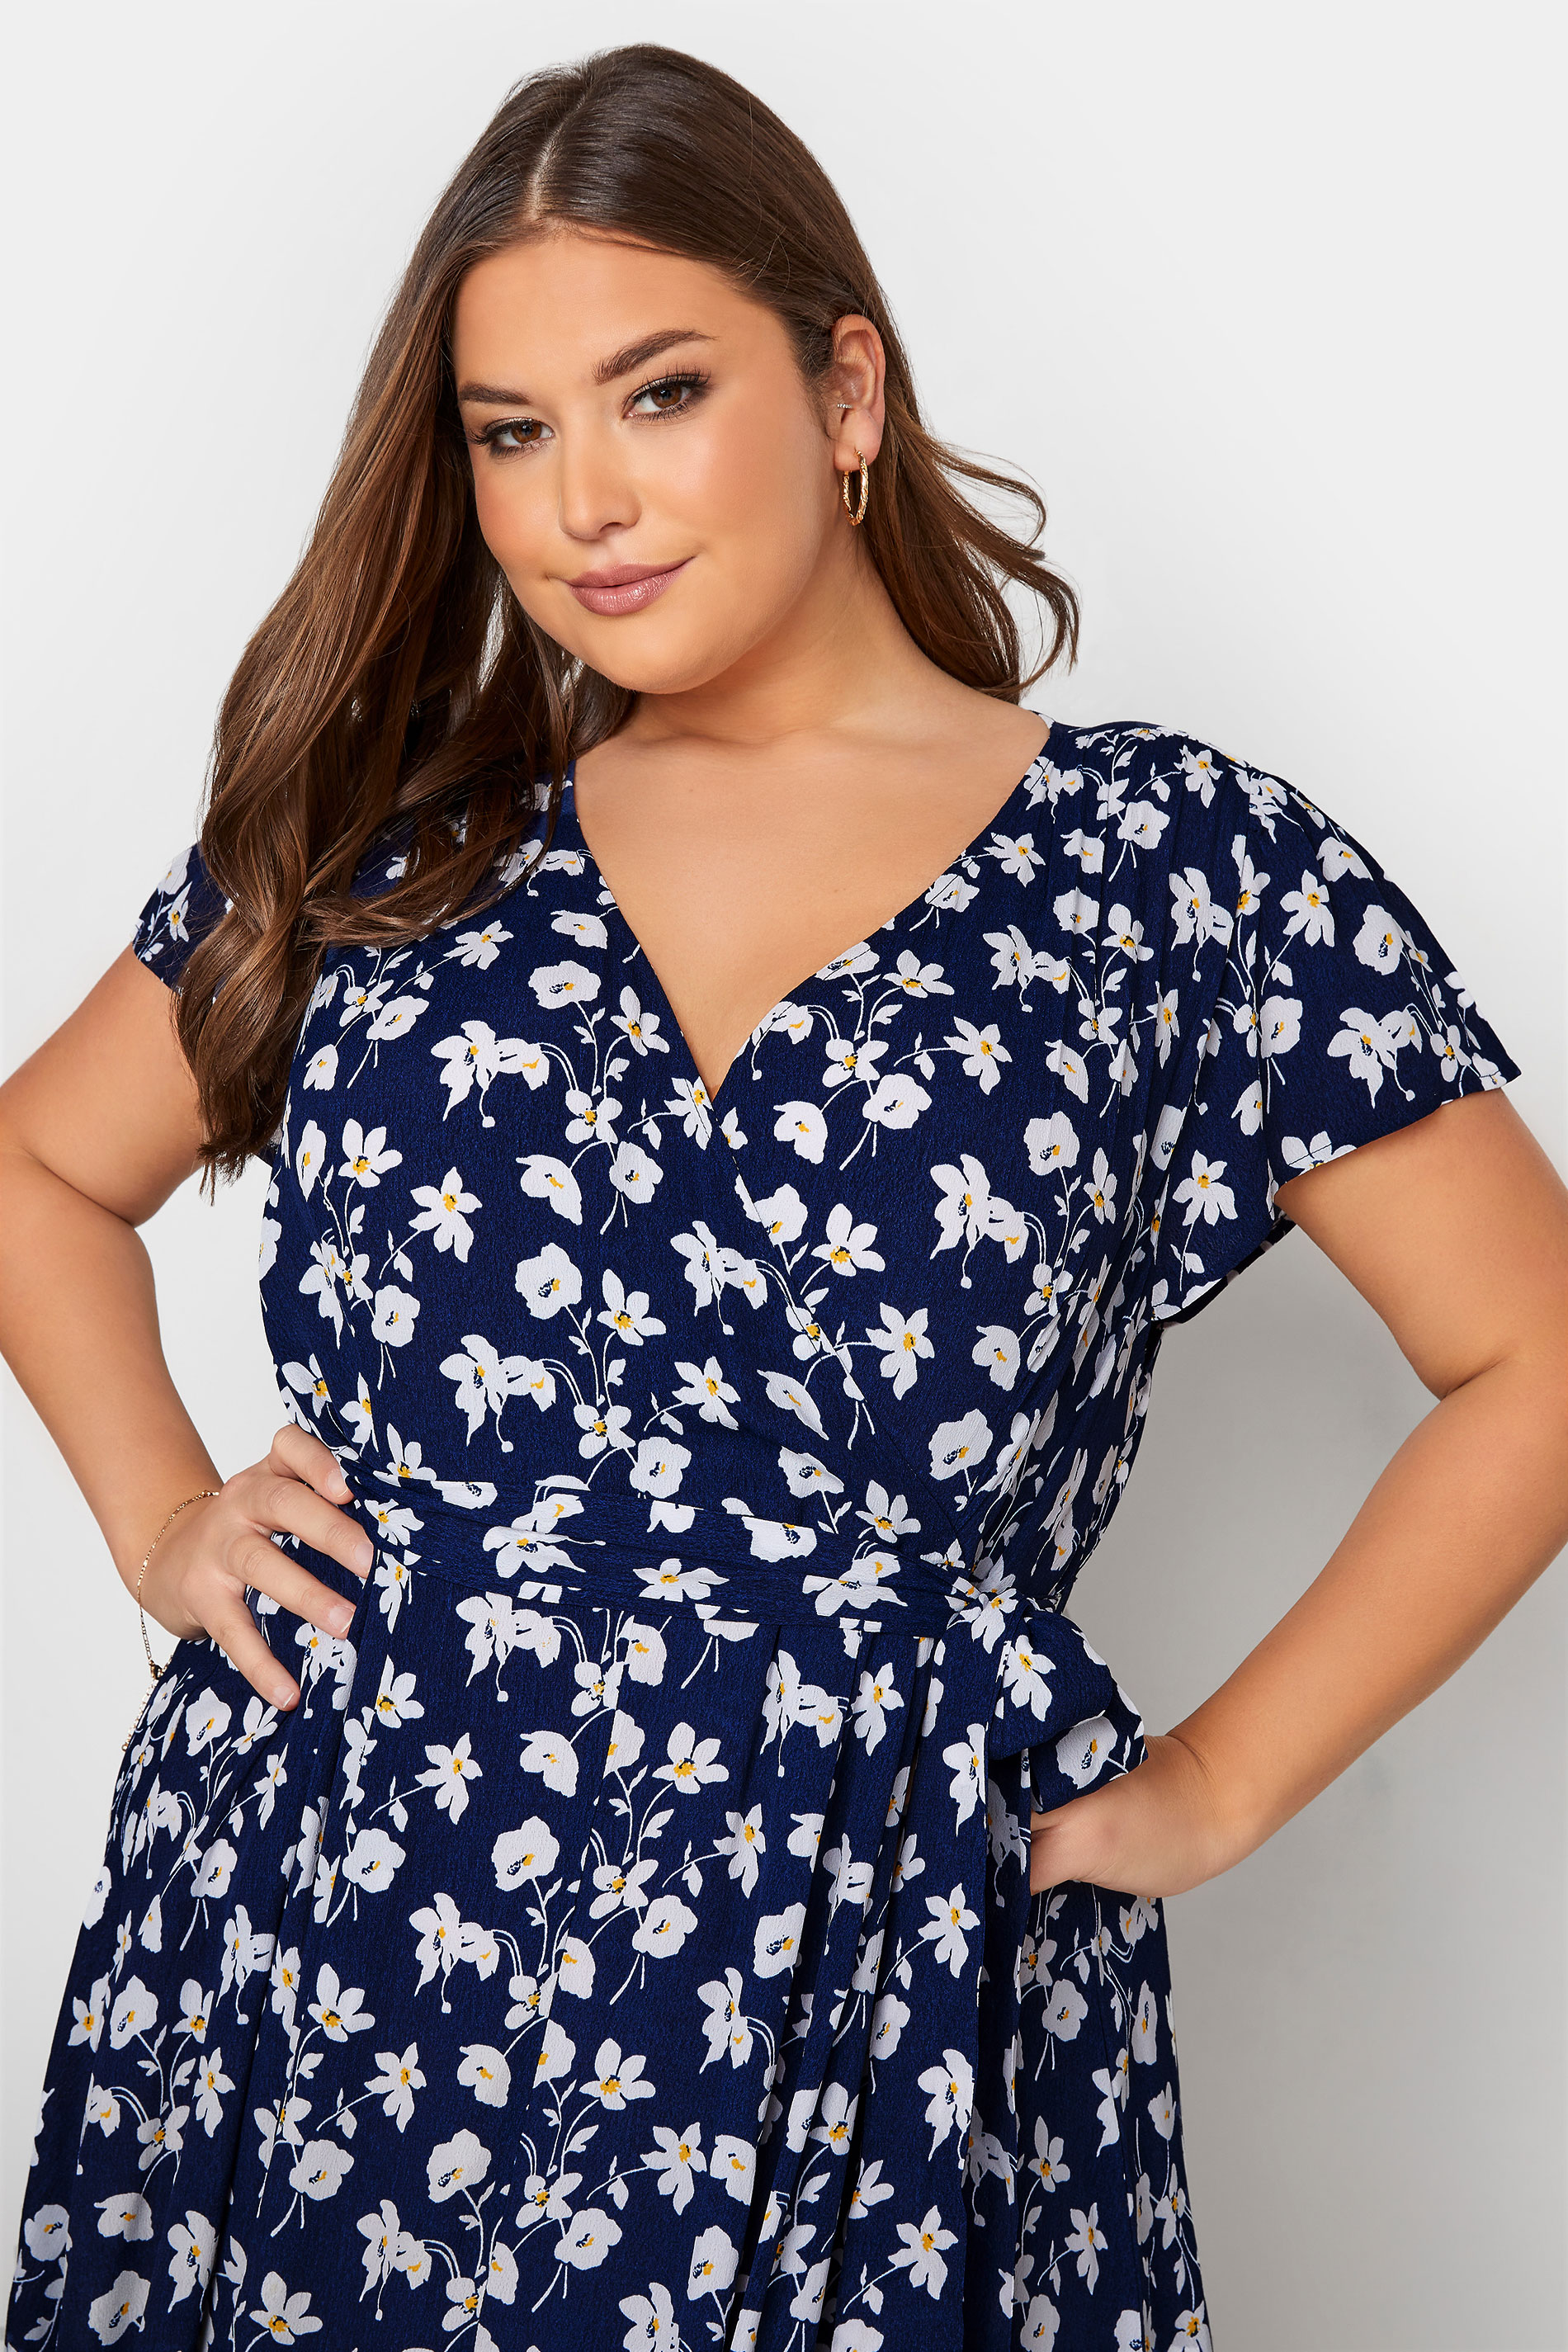 Robes Grande Taille Grande taille  Robes Portefeuilles | YOURS LONDON - Robe Midi Bleue Marine Floral Cache-Coeur - NG46821